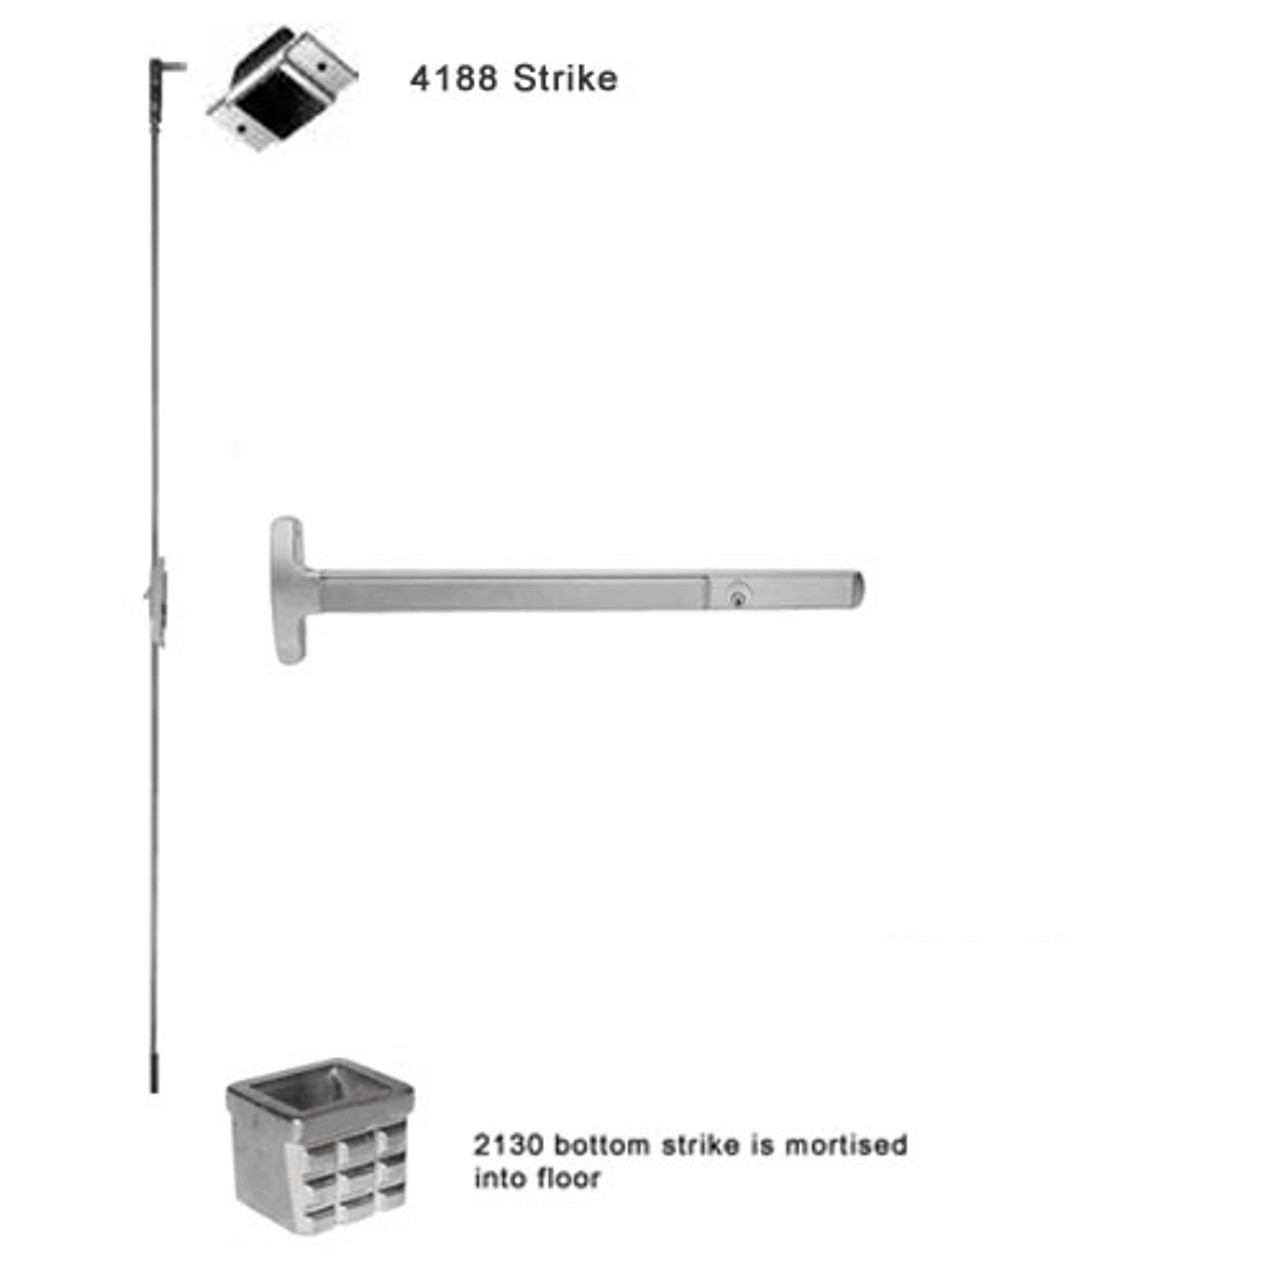 CD24-C-L-NL-DANE-US28-3-RHR Falcon 24 Series Concealed Vertical Rod Device 712L-NL Dane Lever with Night Latch Trim in Anodized Aluminum